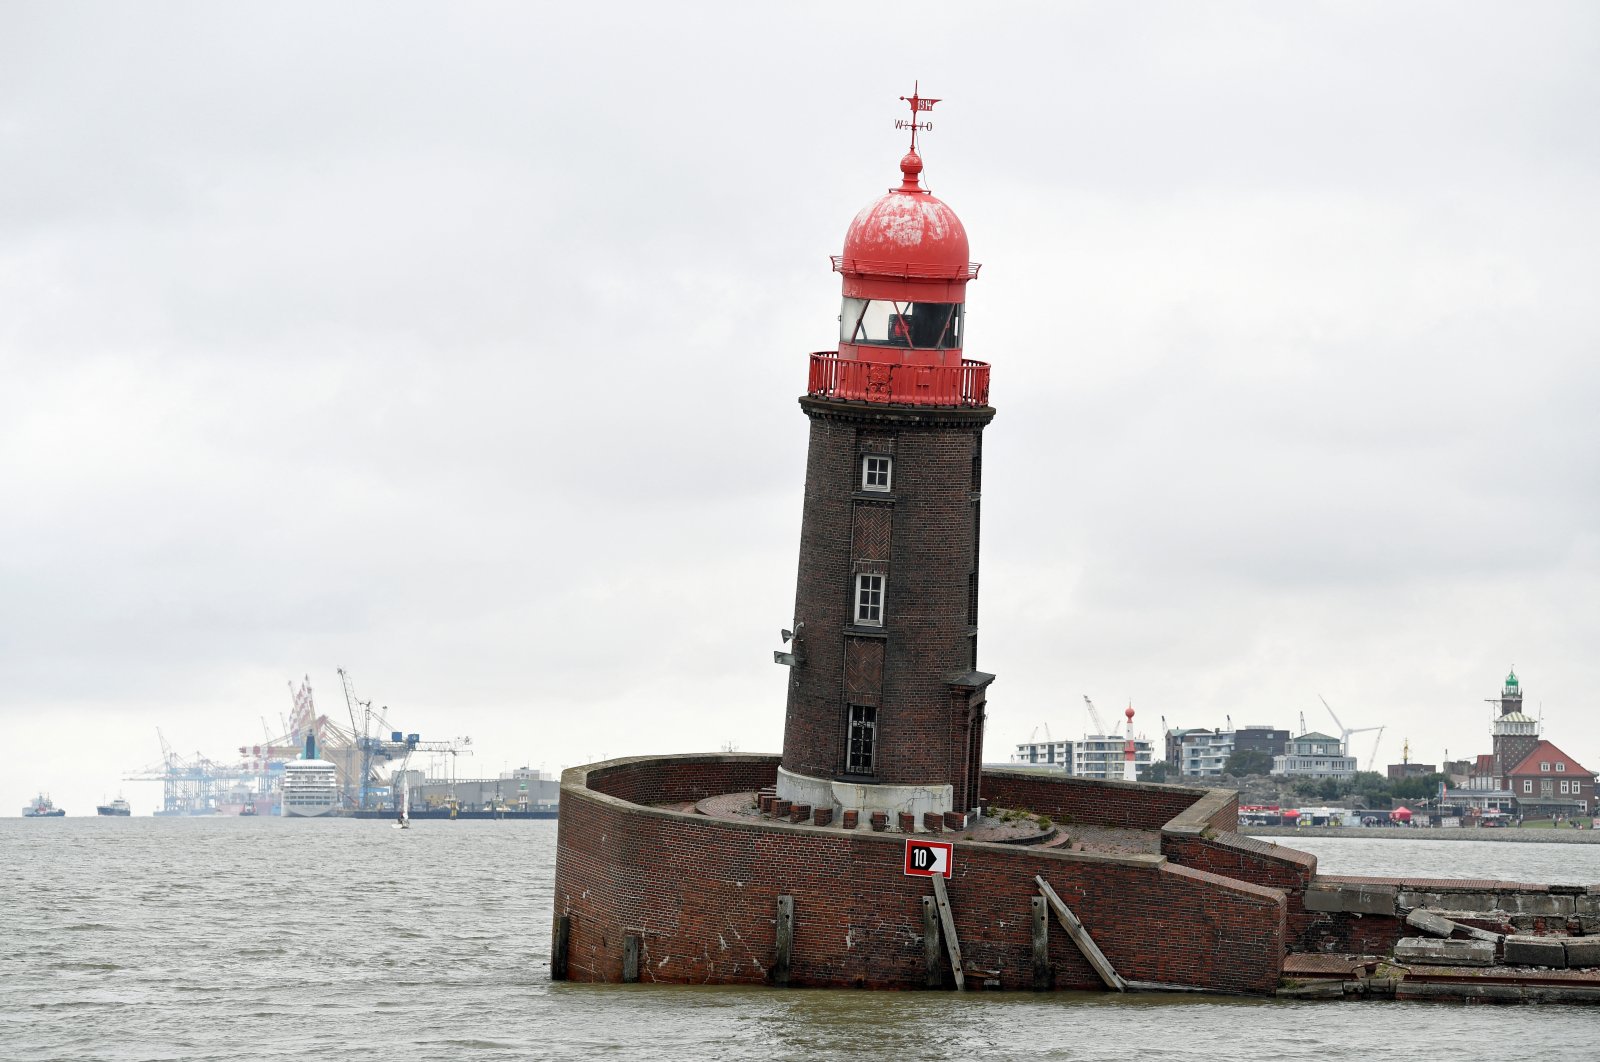 The historic lighthouse in the harbor, which appears on the brink of toppling over, is pictured in Bremerhaven, Germany, Aug. 18, 2022. (Reuters Photo)